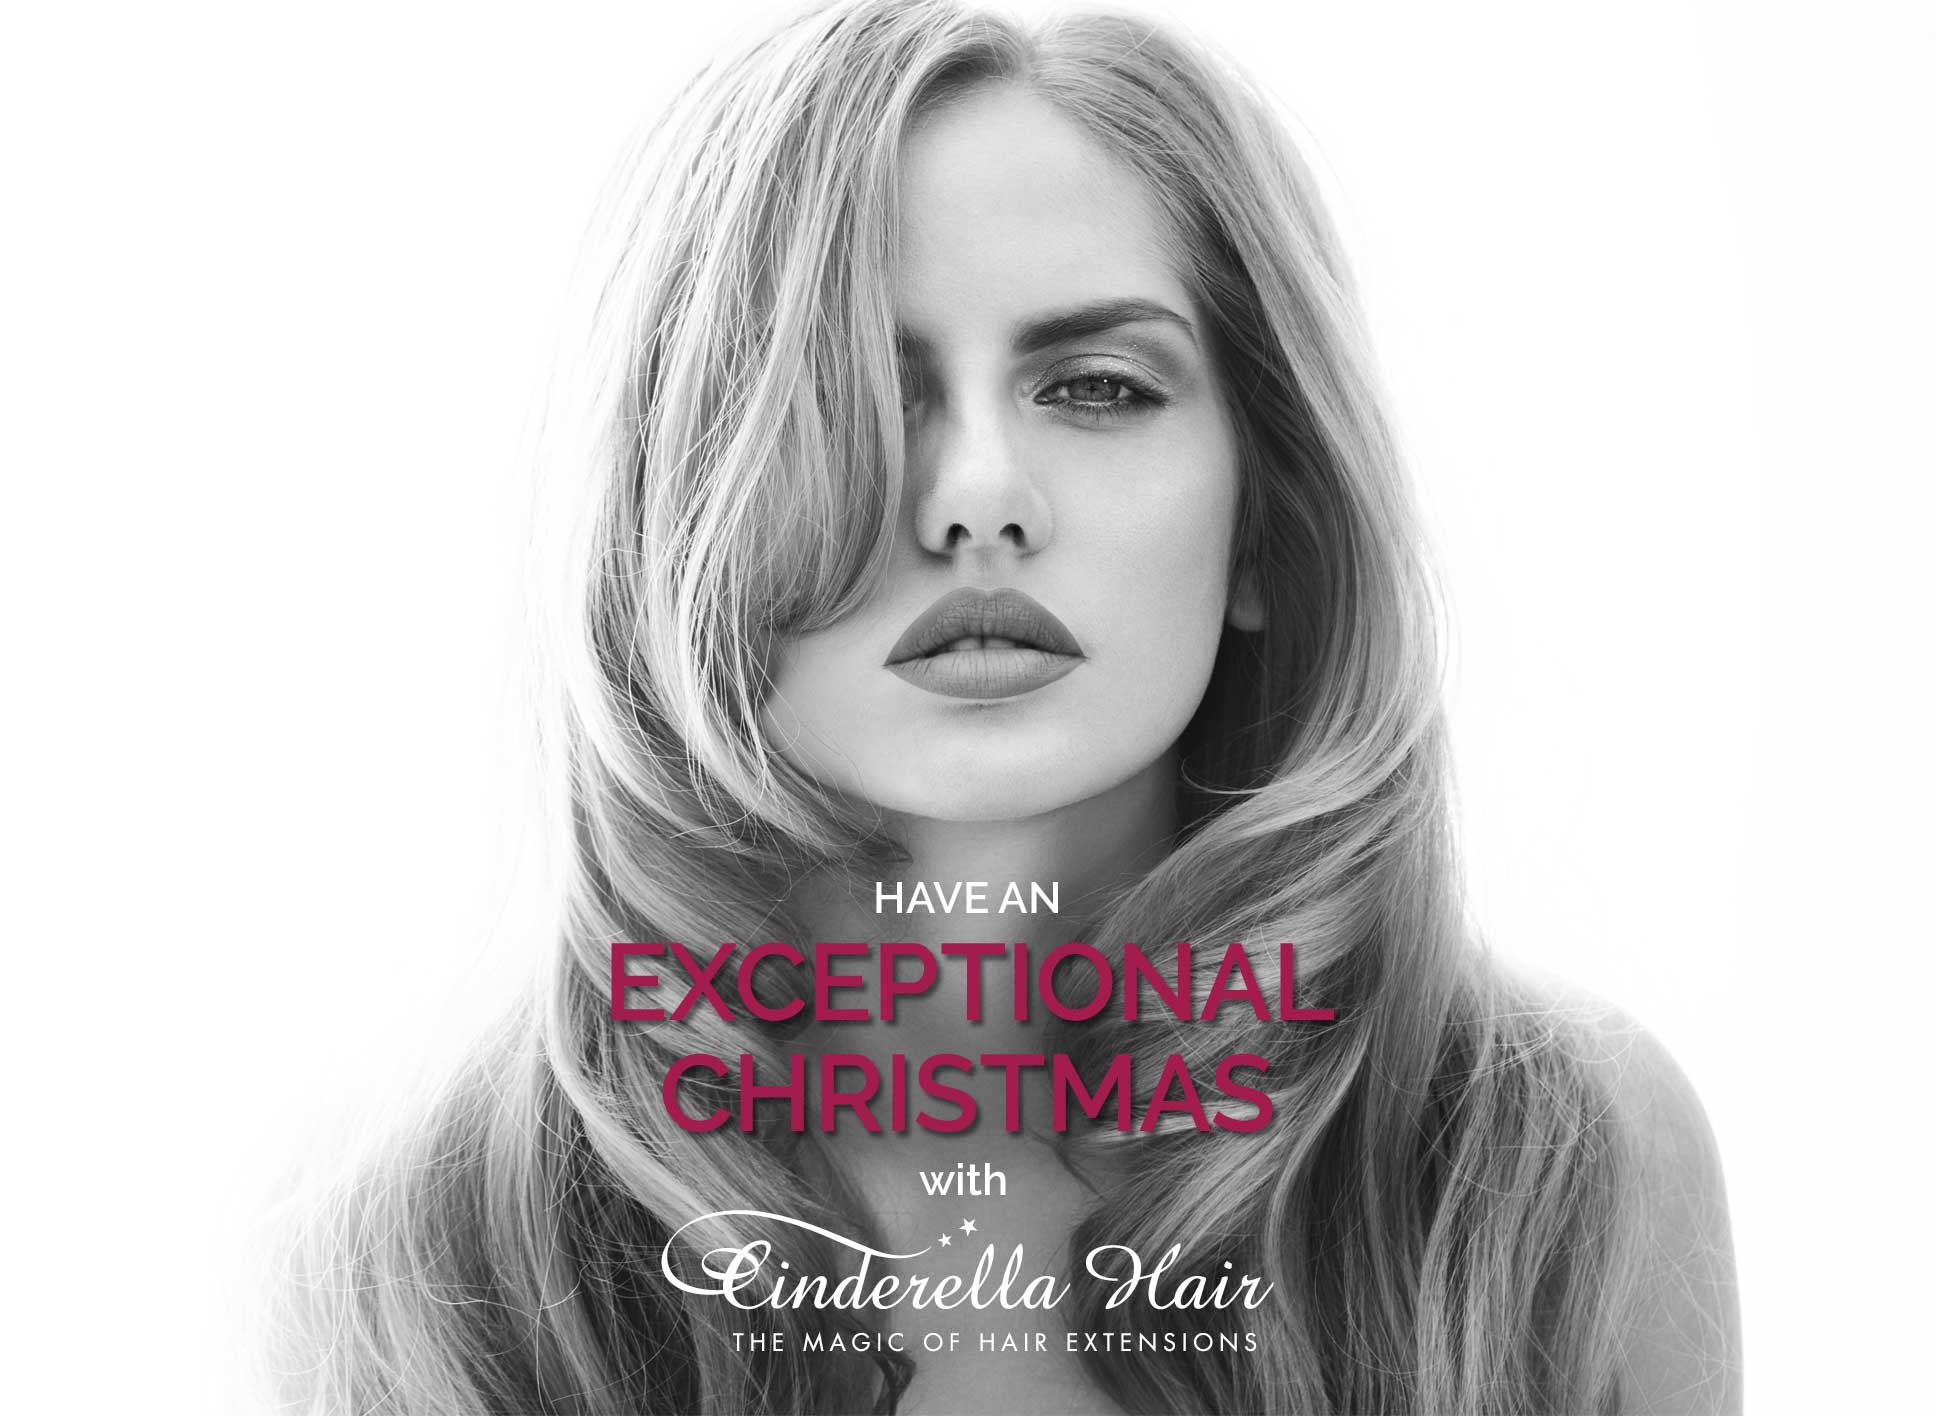 Hair Extensions for Christmas. Cinderella Hair Extensions